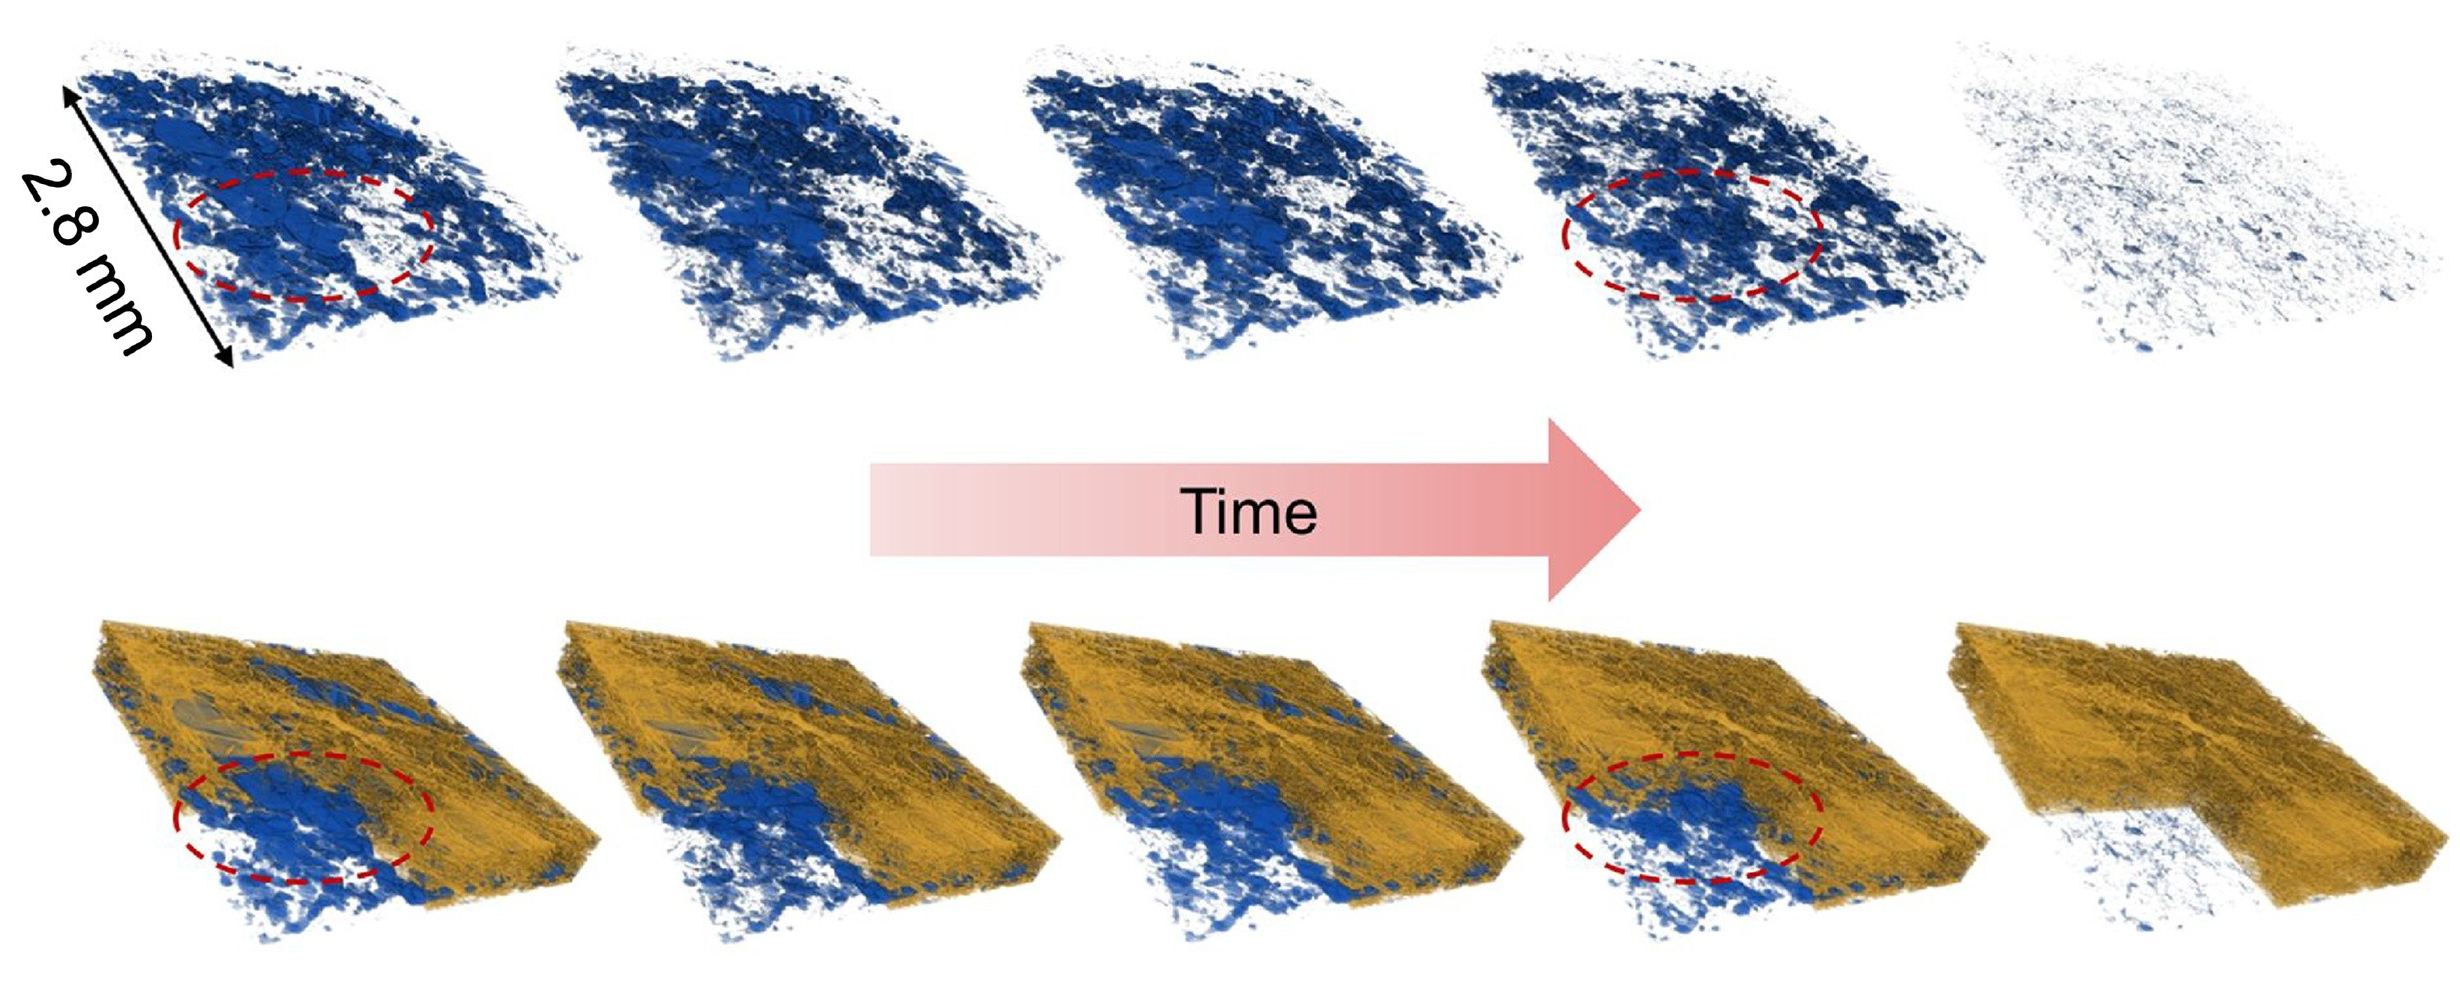 Water clusters in sample fuel-cell components shrink over time in this sequence of images, produced by a 3-D imaging technique known as micro X-ray computed tomography. The water clusters were contained in a fibrous membrane that was exposed to different temperatures. The mean temperature began at about 104 degrees Fahrenheit and was gradually increased to about 131 degrees Fahrenheit. The top side of the images was the hotter side of the sample, and the bottom of the images was the colder side. (Credit: Berkeley Lab)